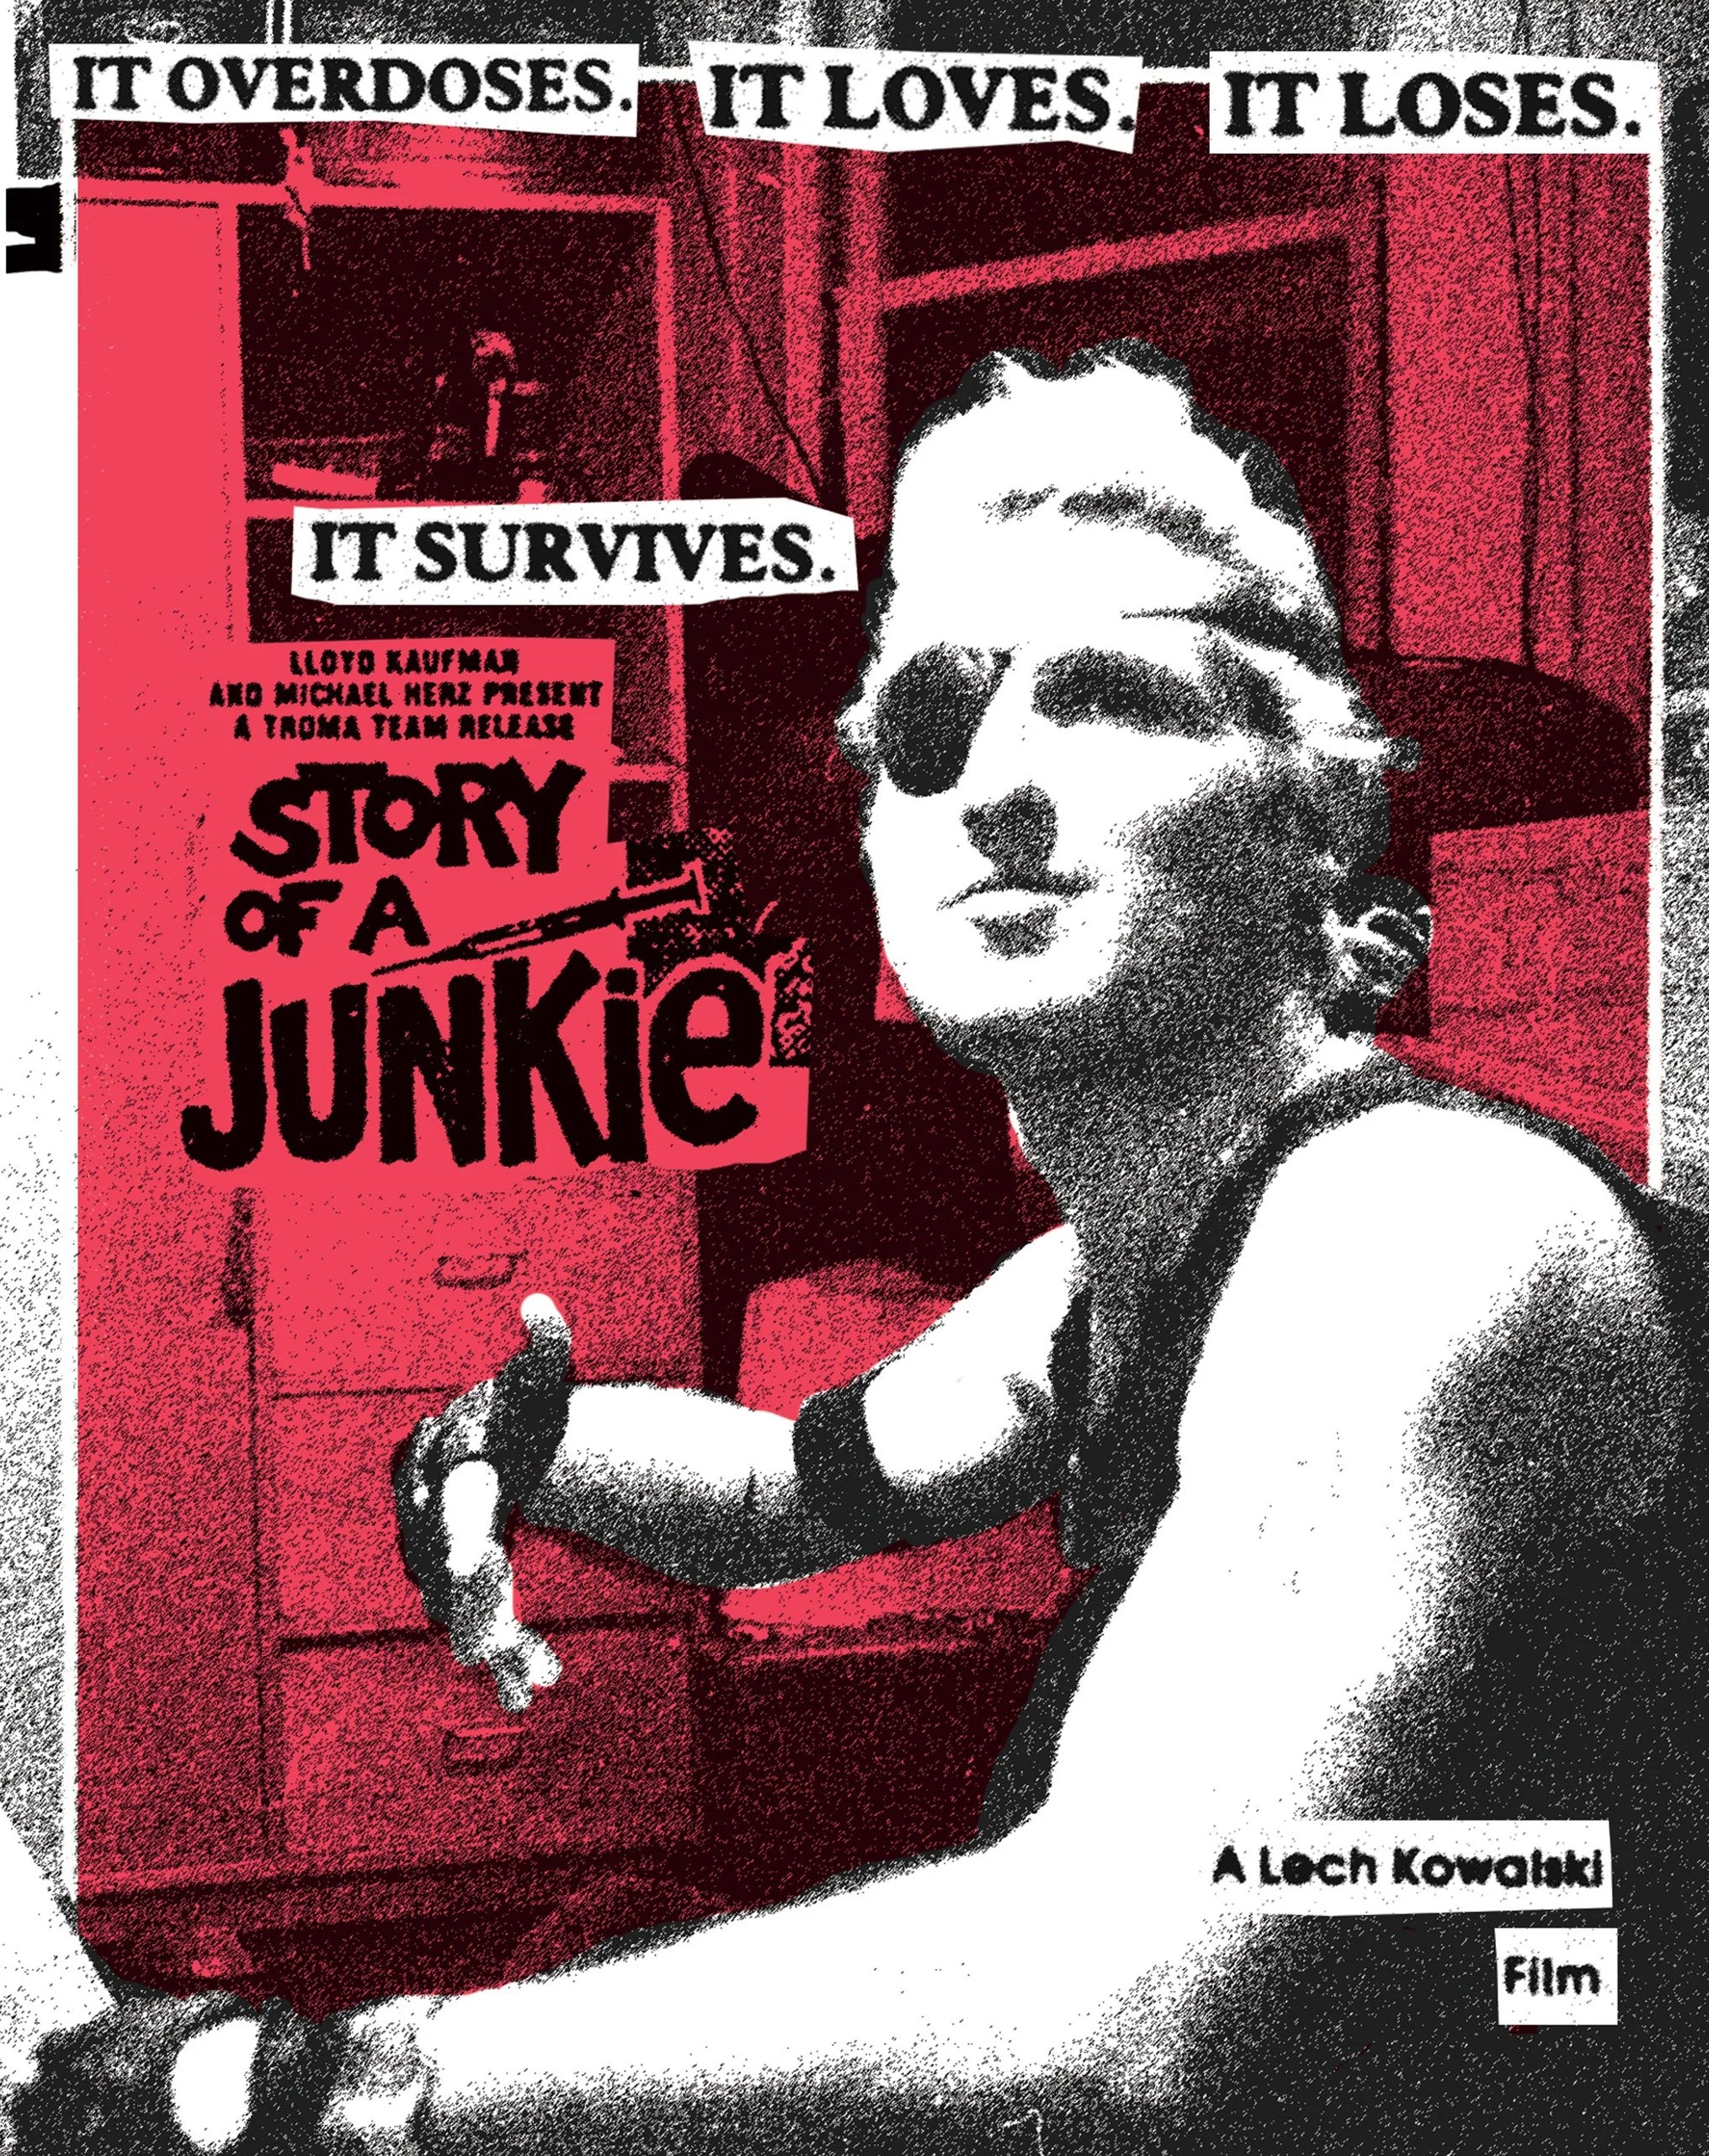 STORY OF A JUNKIE (LIMITED EDITION) BLU-RAY/CD